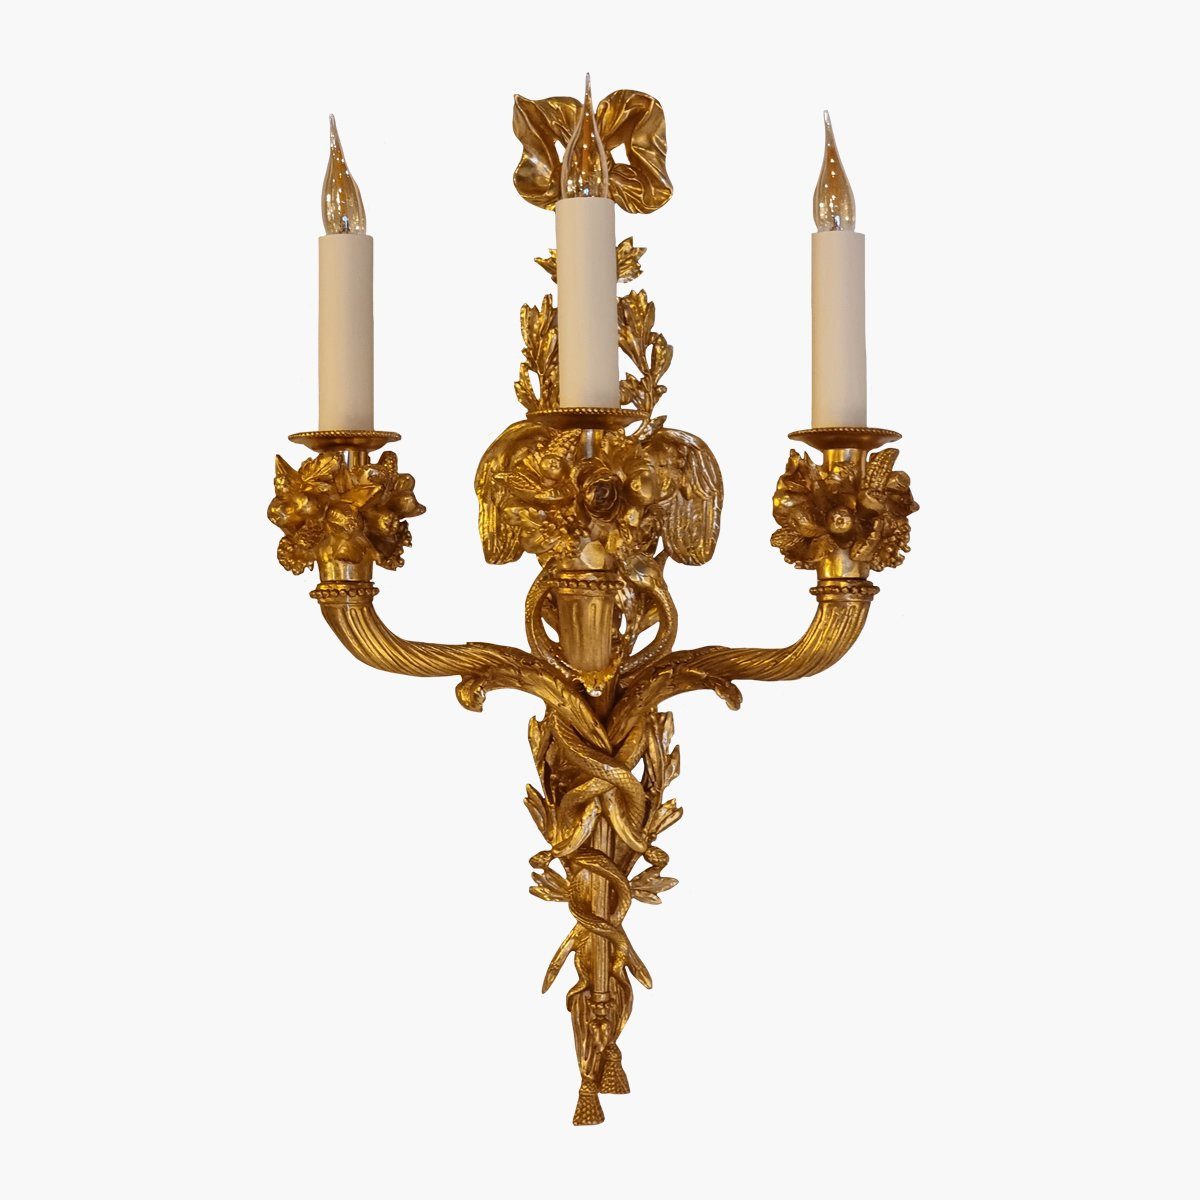 LACARRIERE-3 SCONCE